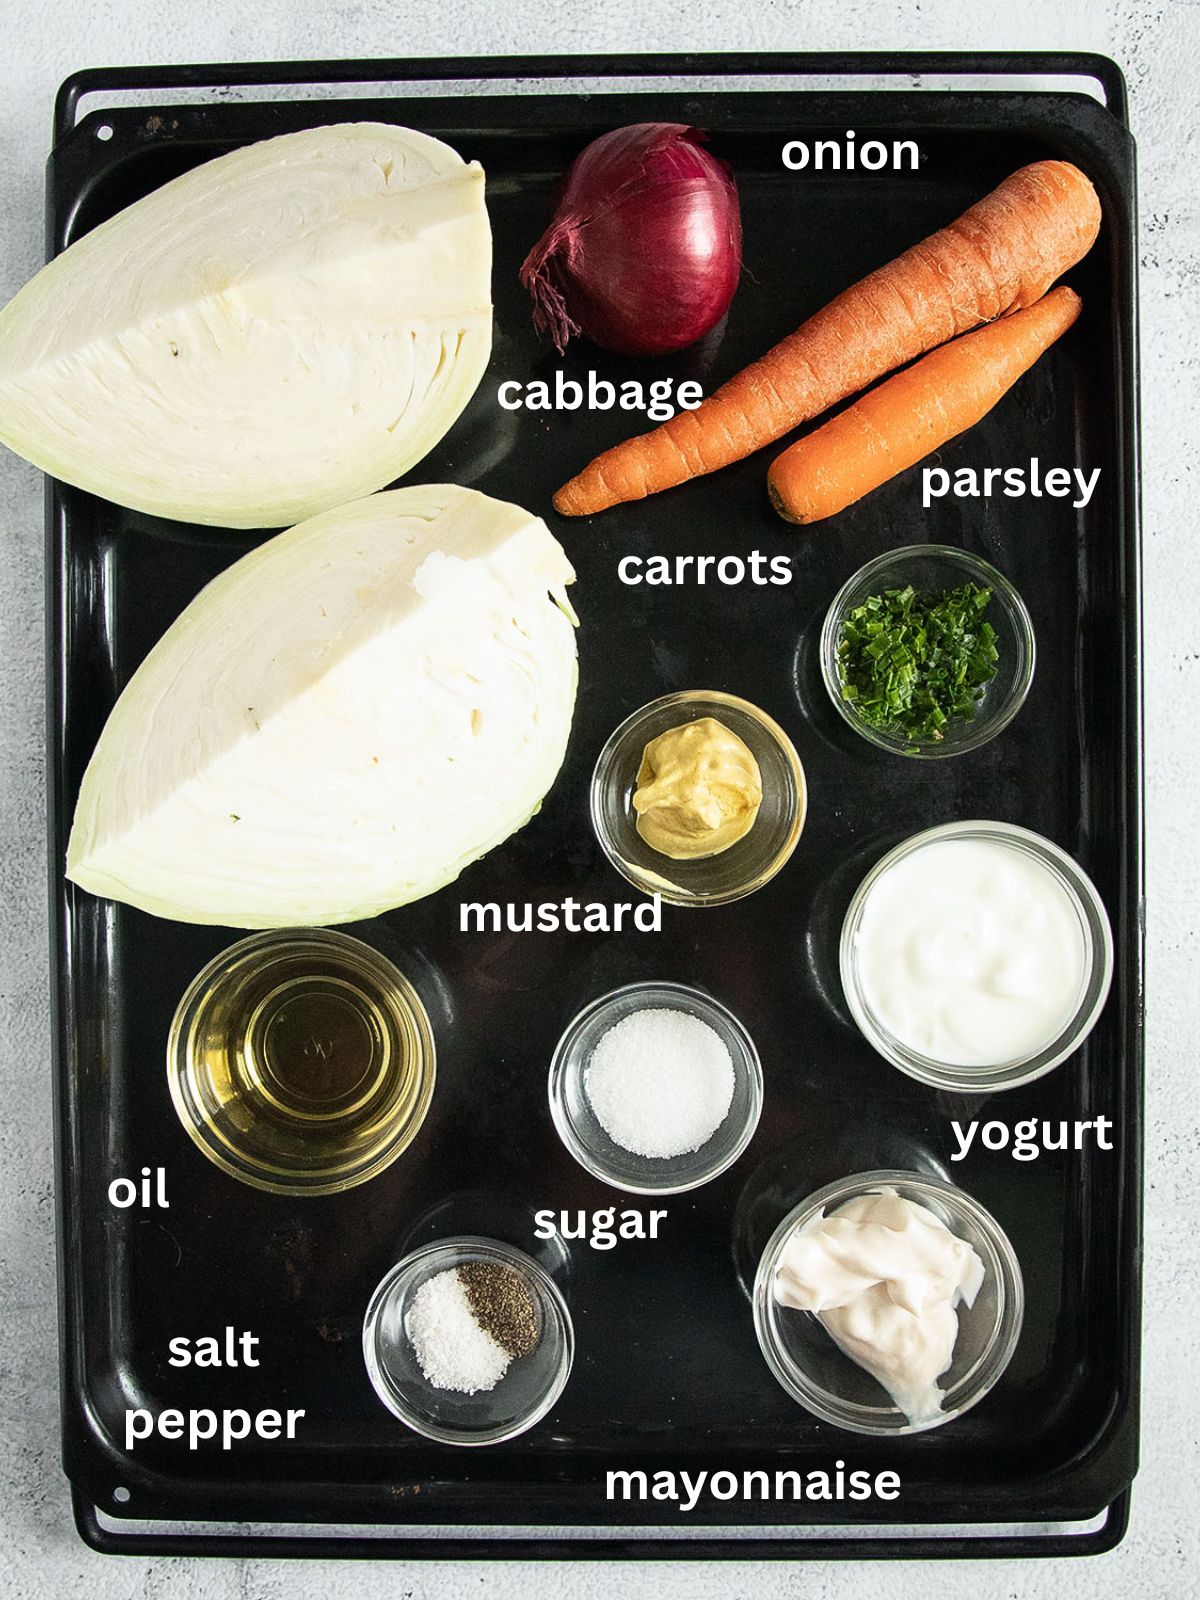 listed ingredients needed to make coleslaw with cabbage, carrots, and mayonnaise.